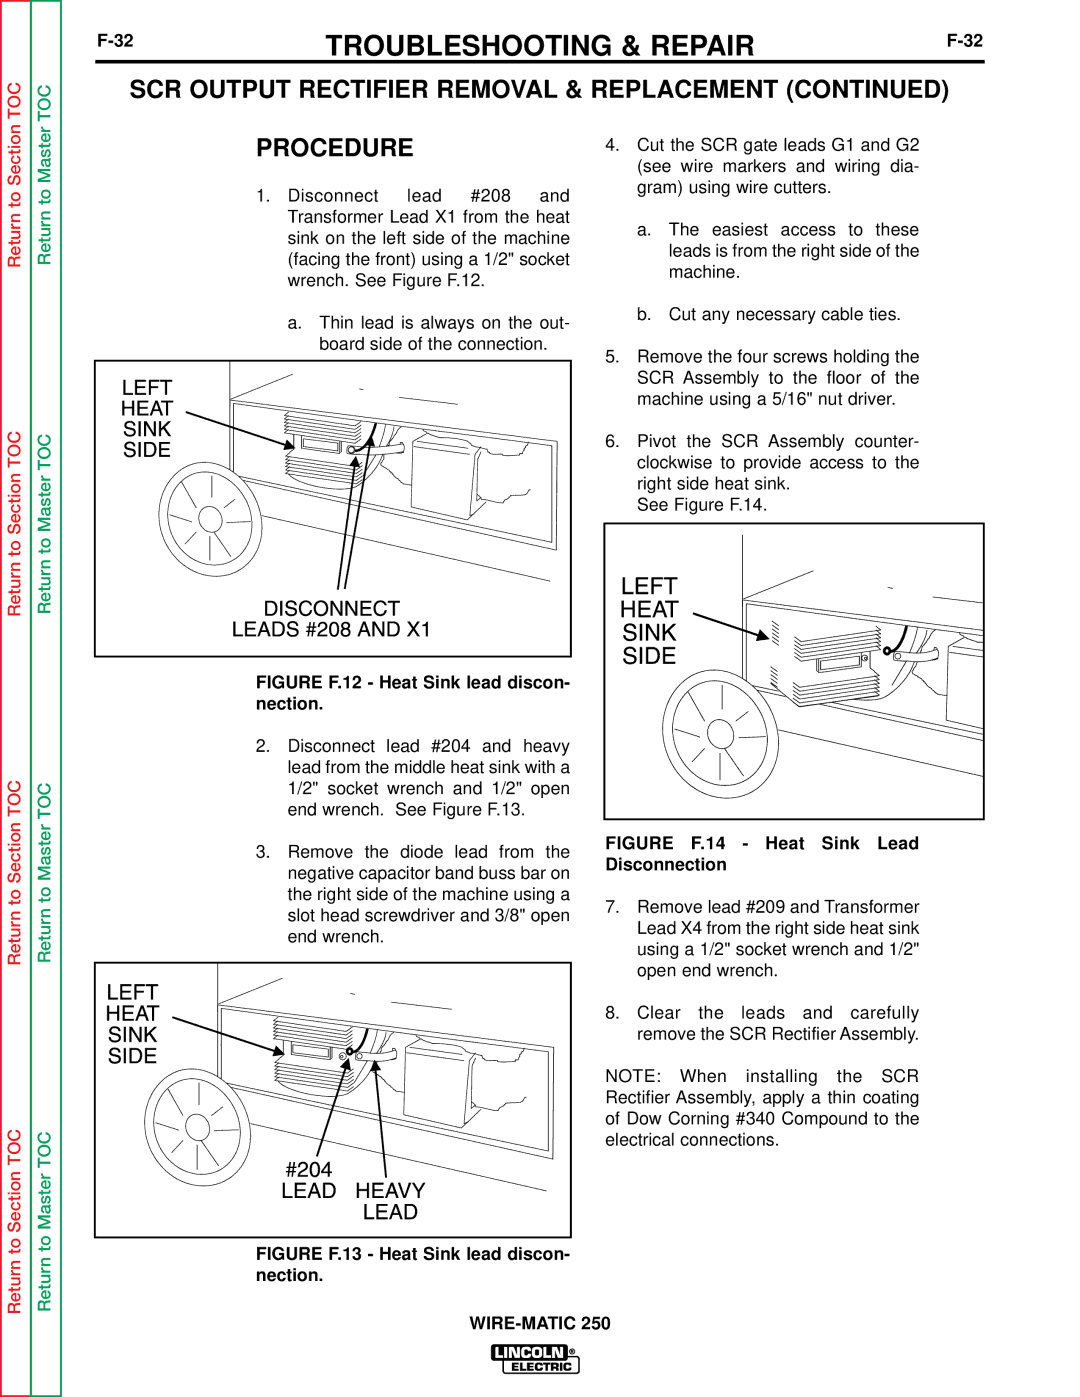 Lincoln Electric SVM 117-A service manual Right side heat sink See Figure F.14, Disconnection Heat Sink Lead 